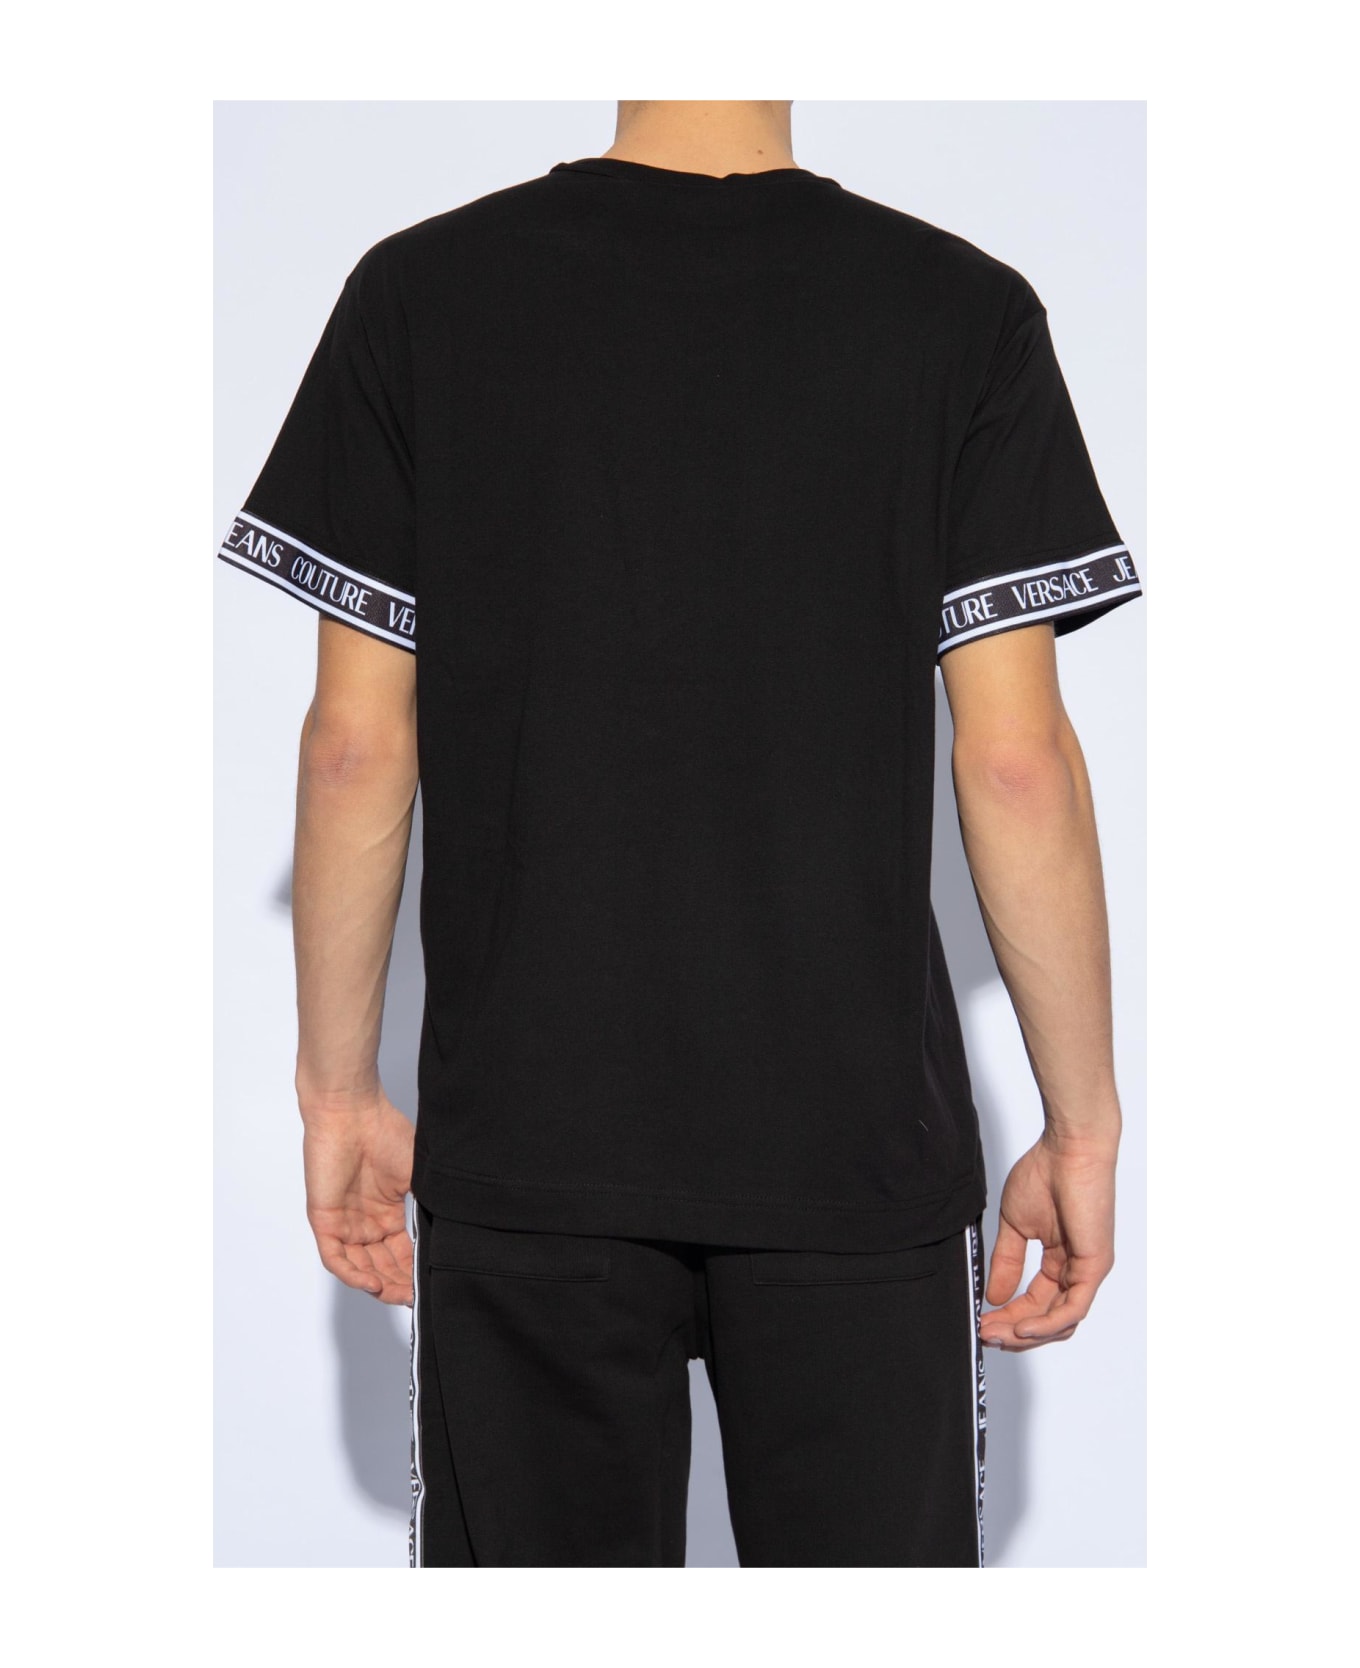 Versace Jeans Couture T-shirt With Logo - Black